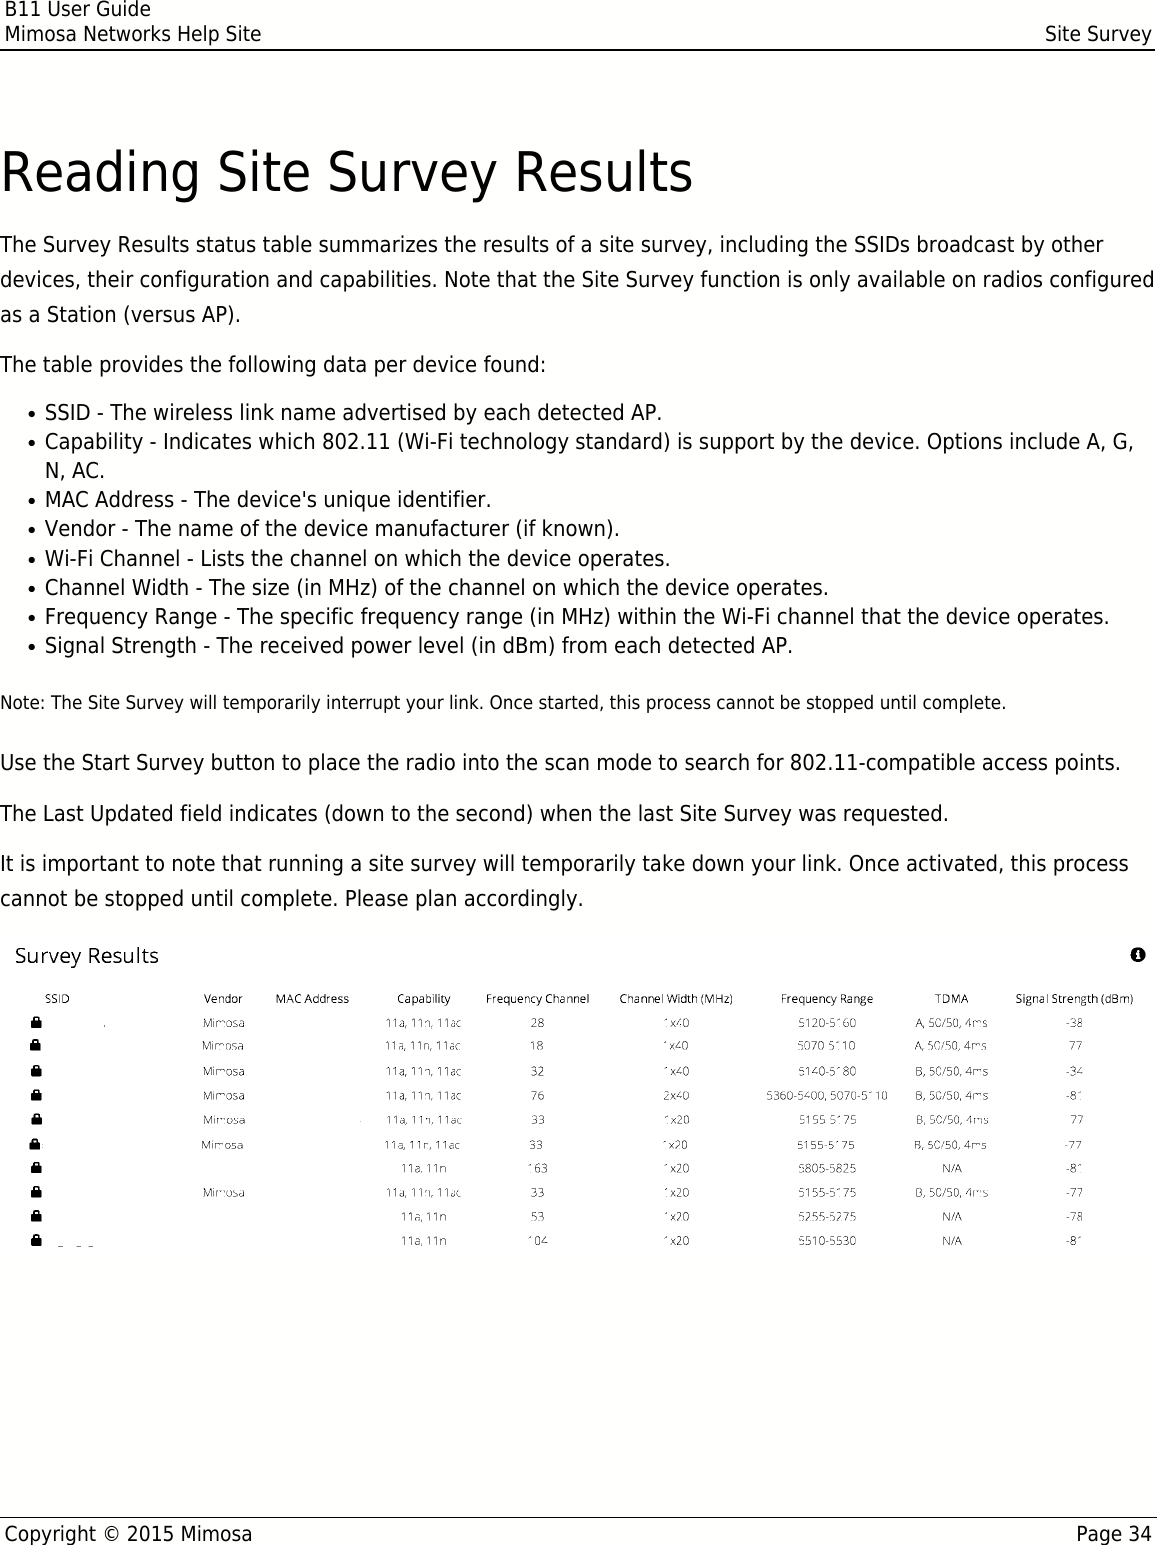 B11 User GuideMimosa Networks Help Site Site SurveyCopyright © 2015 Mimosa Page 34Reading Site Survey ResultsThe Survey Results status table summarizes the results of a site survey, including the SSIDs broadcast by otherdevices, their configuration and capabilities. Note that the Site Survey function is only available on radios configuredas a Station (versus AP).The table provides the following data per device found:SSID - The wireless link name advertised by each detected AP.●Capability - Indicates which 802.11 (Wi-Fi technology standard) is support by the device. Options include A, G,●N, AC.MAC Address - The device&apos;s unique identifier.●Vendor - The name of the device manufacturer (if known).●Wi-Fi Channel - Lists the channel on which the device operates.●Channel Width - The size (in MHz) of the channel on which the device operates.●Frequency Range - The specific frequency range (in MHz) within the Wi-Fi channel that the device operates.●Signal Strength - The received power level (in dBm) from each detected AP.●Note: The Site Survey will temporarily interrupt your link. Once started, this process cannot be stopped until complete.Use the Start Survey button to place the radio into the scan mode to search for 802.11-compatible access points.The Last Updated field indicates (down to the second) when the last Site Survey was requested. It is important to note that running a site survey will temporarily take down your link. Once activated, this processcannot be stopped until complete. Please plan accordingly.